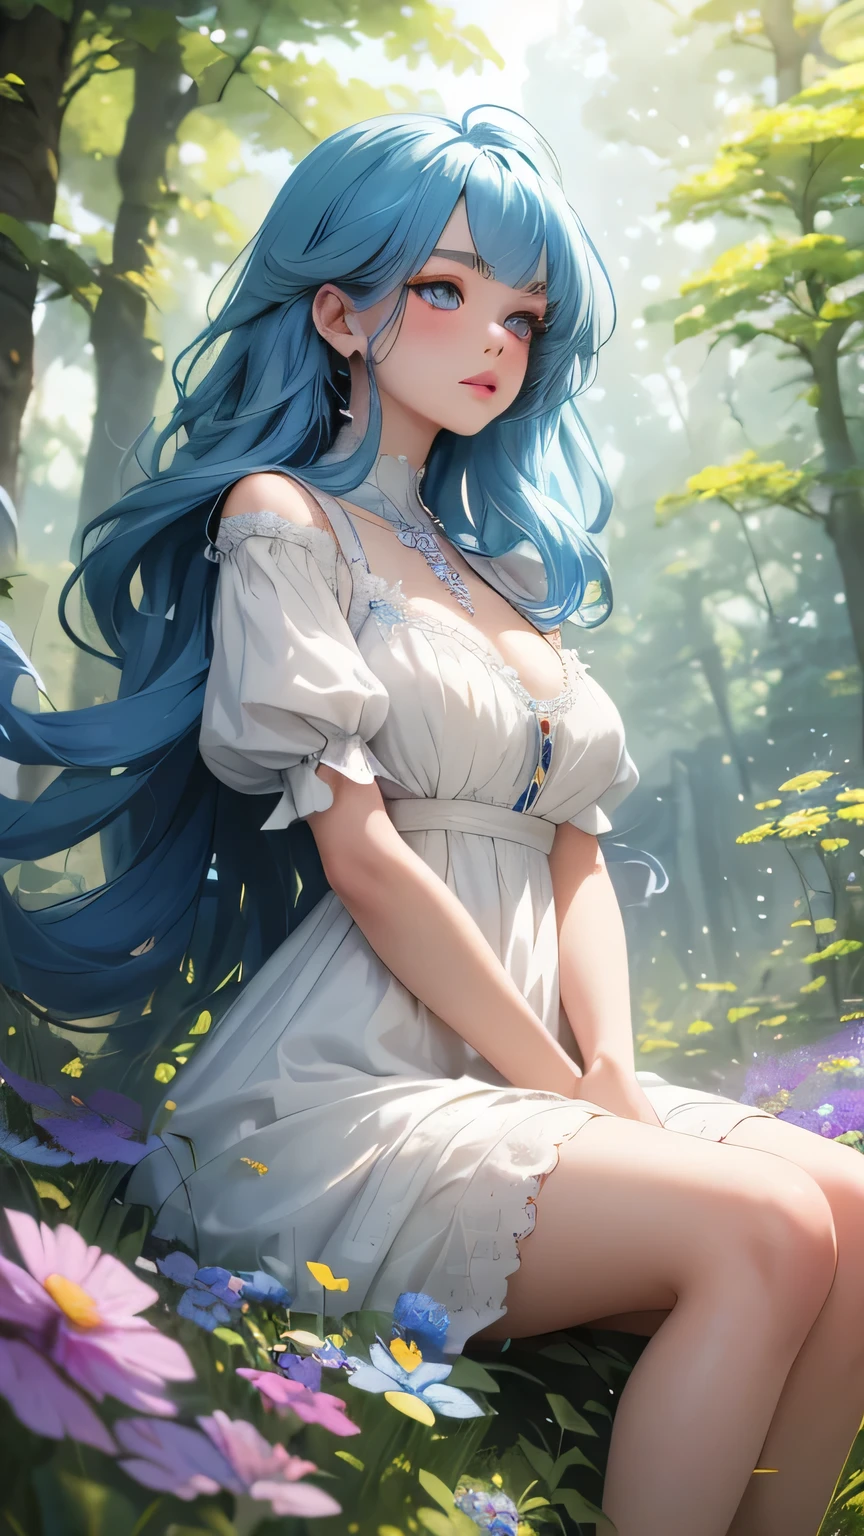 (highest quality,4k,High resolution,masterpiece:1.2),Super detailed,realistic,HDR,anime,girl,blue hair,white dress,i deny that,fine and beautiful eyes,thick and beautiful lips,sitting on the ground,wild flowers around her,sunlight filtering through the trees,peaceful atmosphere,bright colors,soft shadow,dreamy style